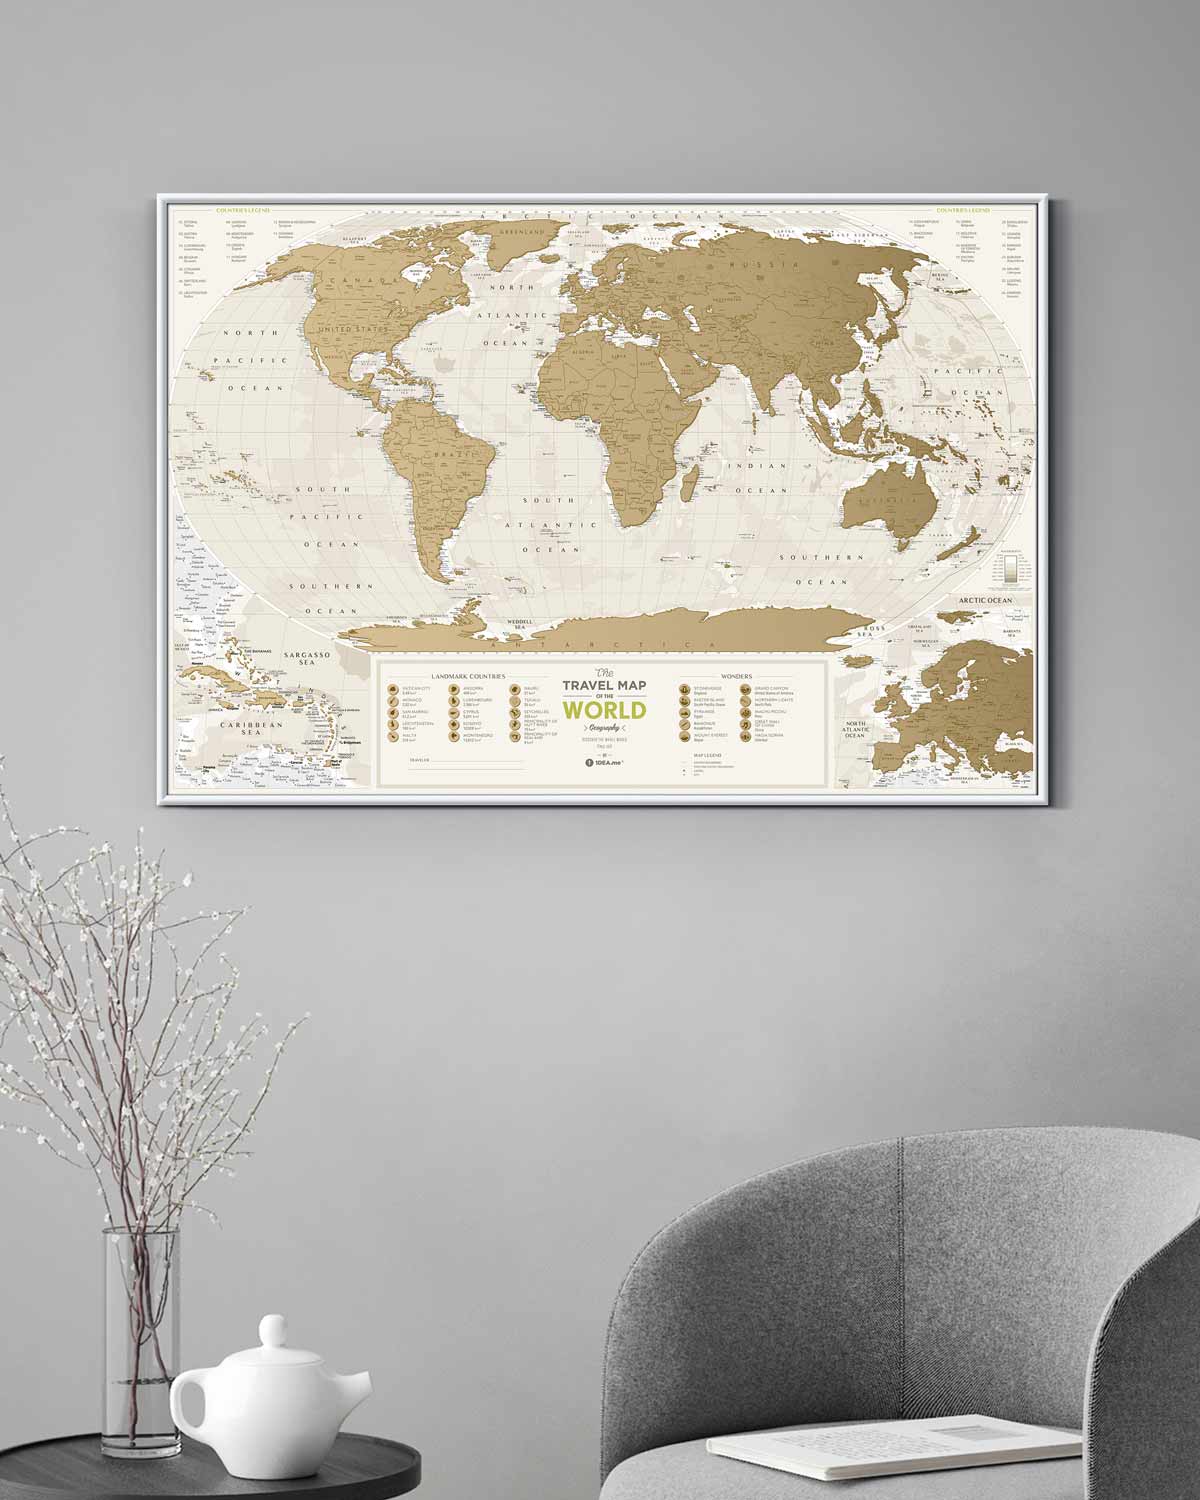 Scratch Off Map Travel Map®GEOGRAPHY World - Design gifts: scratch off  maps & posters